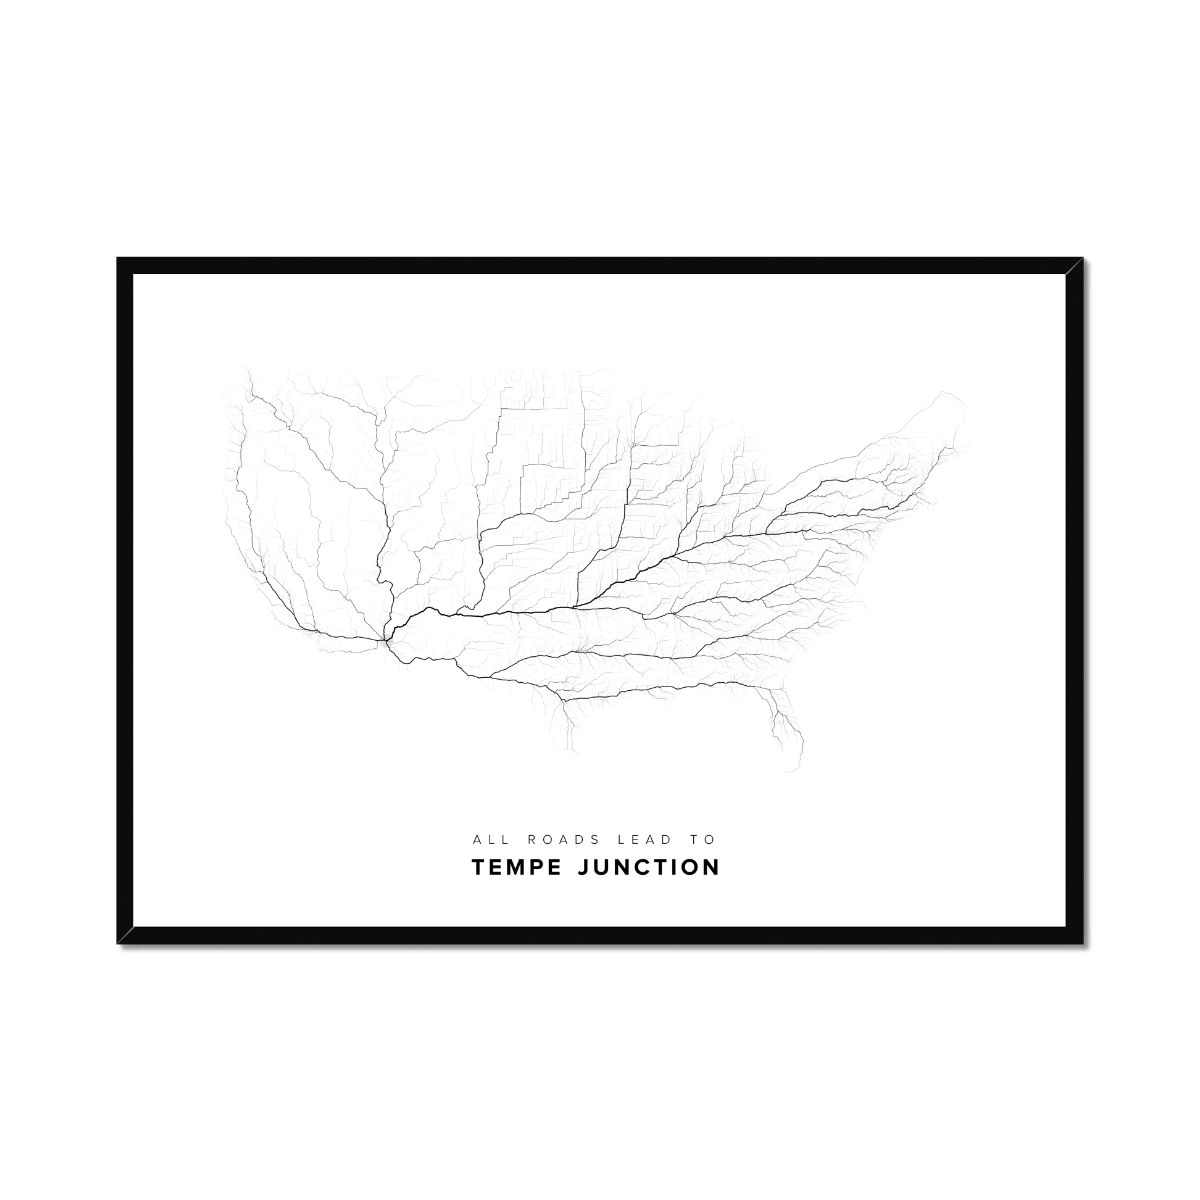 All roads lead to Tempe Junction (United States of America) Fine Art Map Print